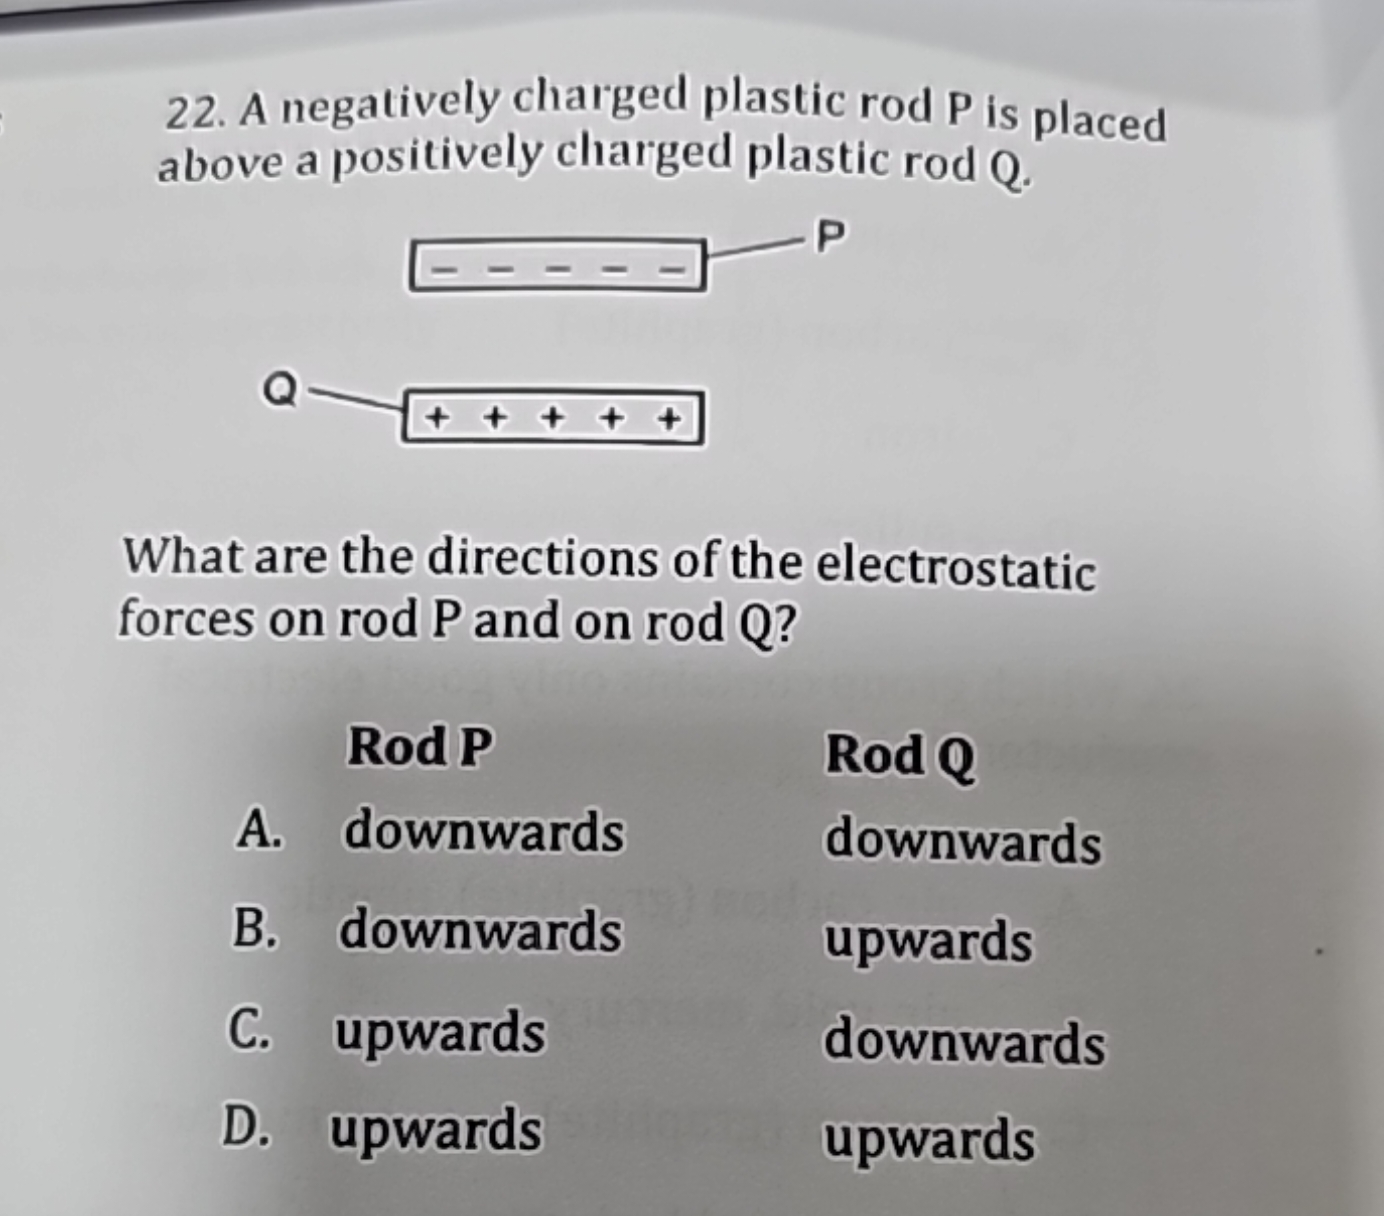 A negatively charged plastic rod P is placed above a positively charge